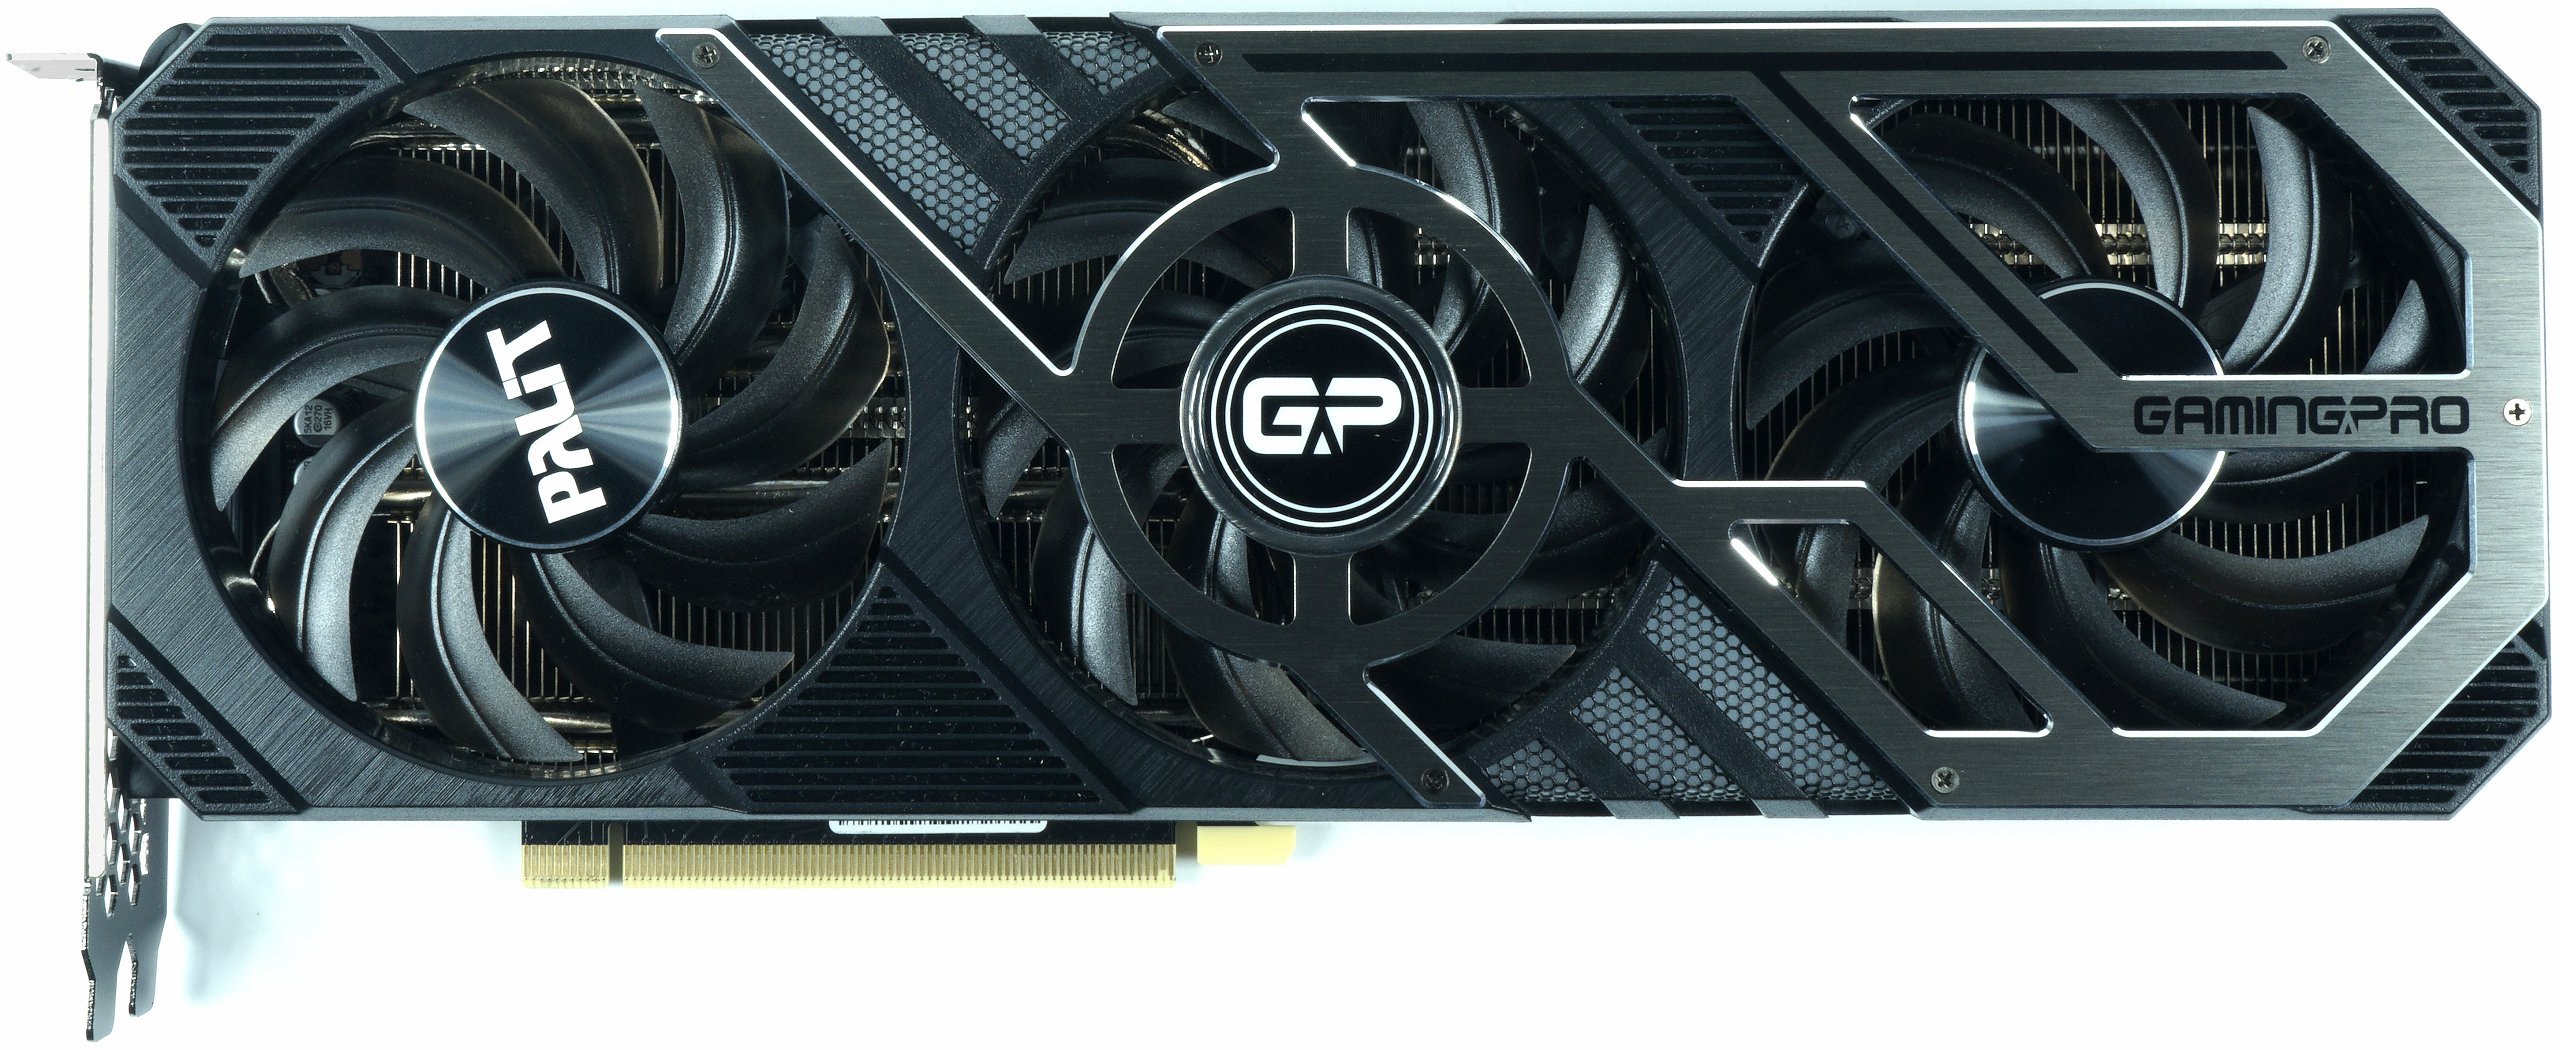 Palit GeForce RTX 3080 Gaming Pro Review Reasonable Entry into the NVIDIA  Upper Class igor'sLAB